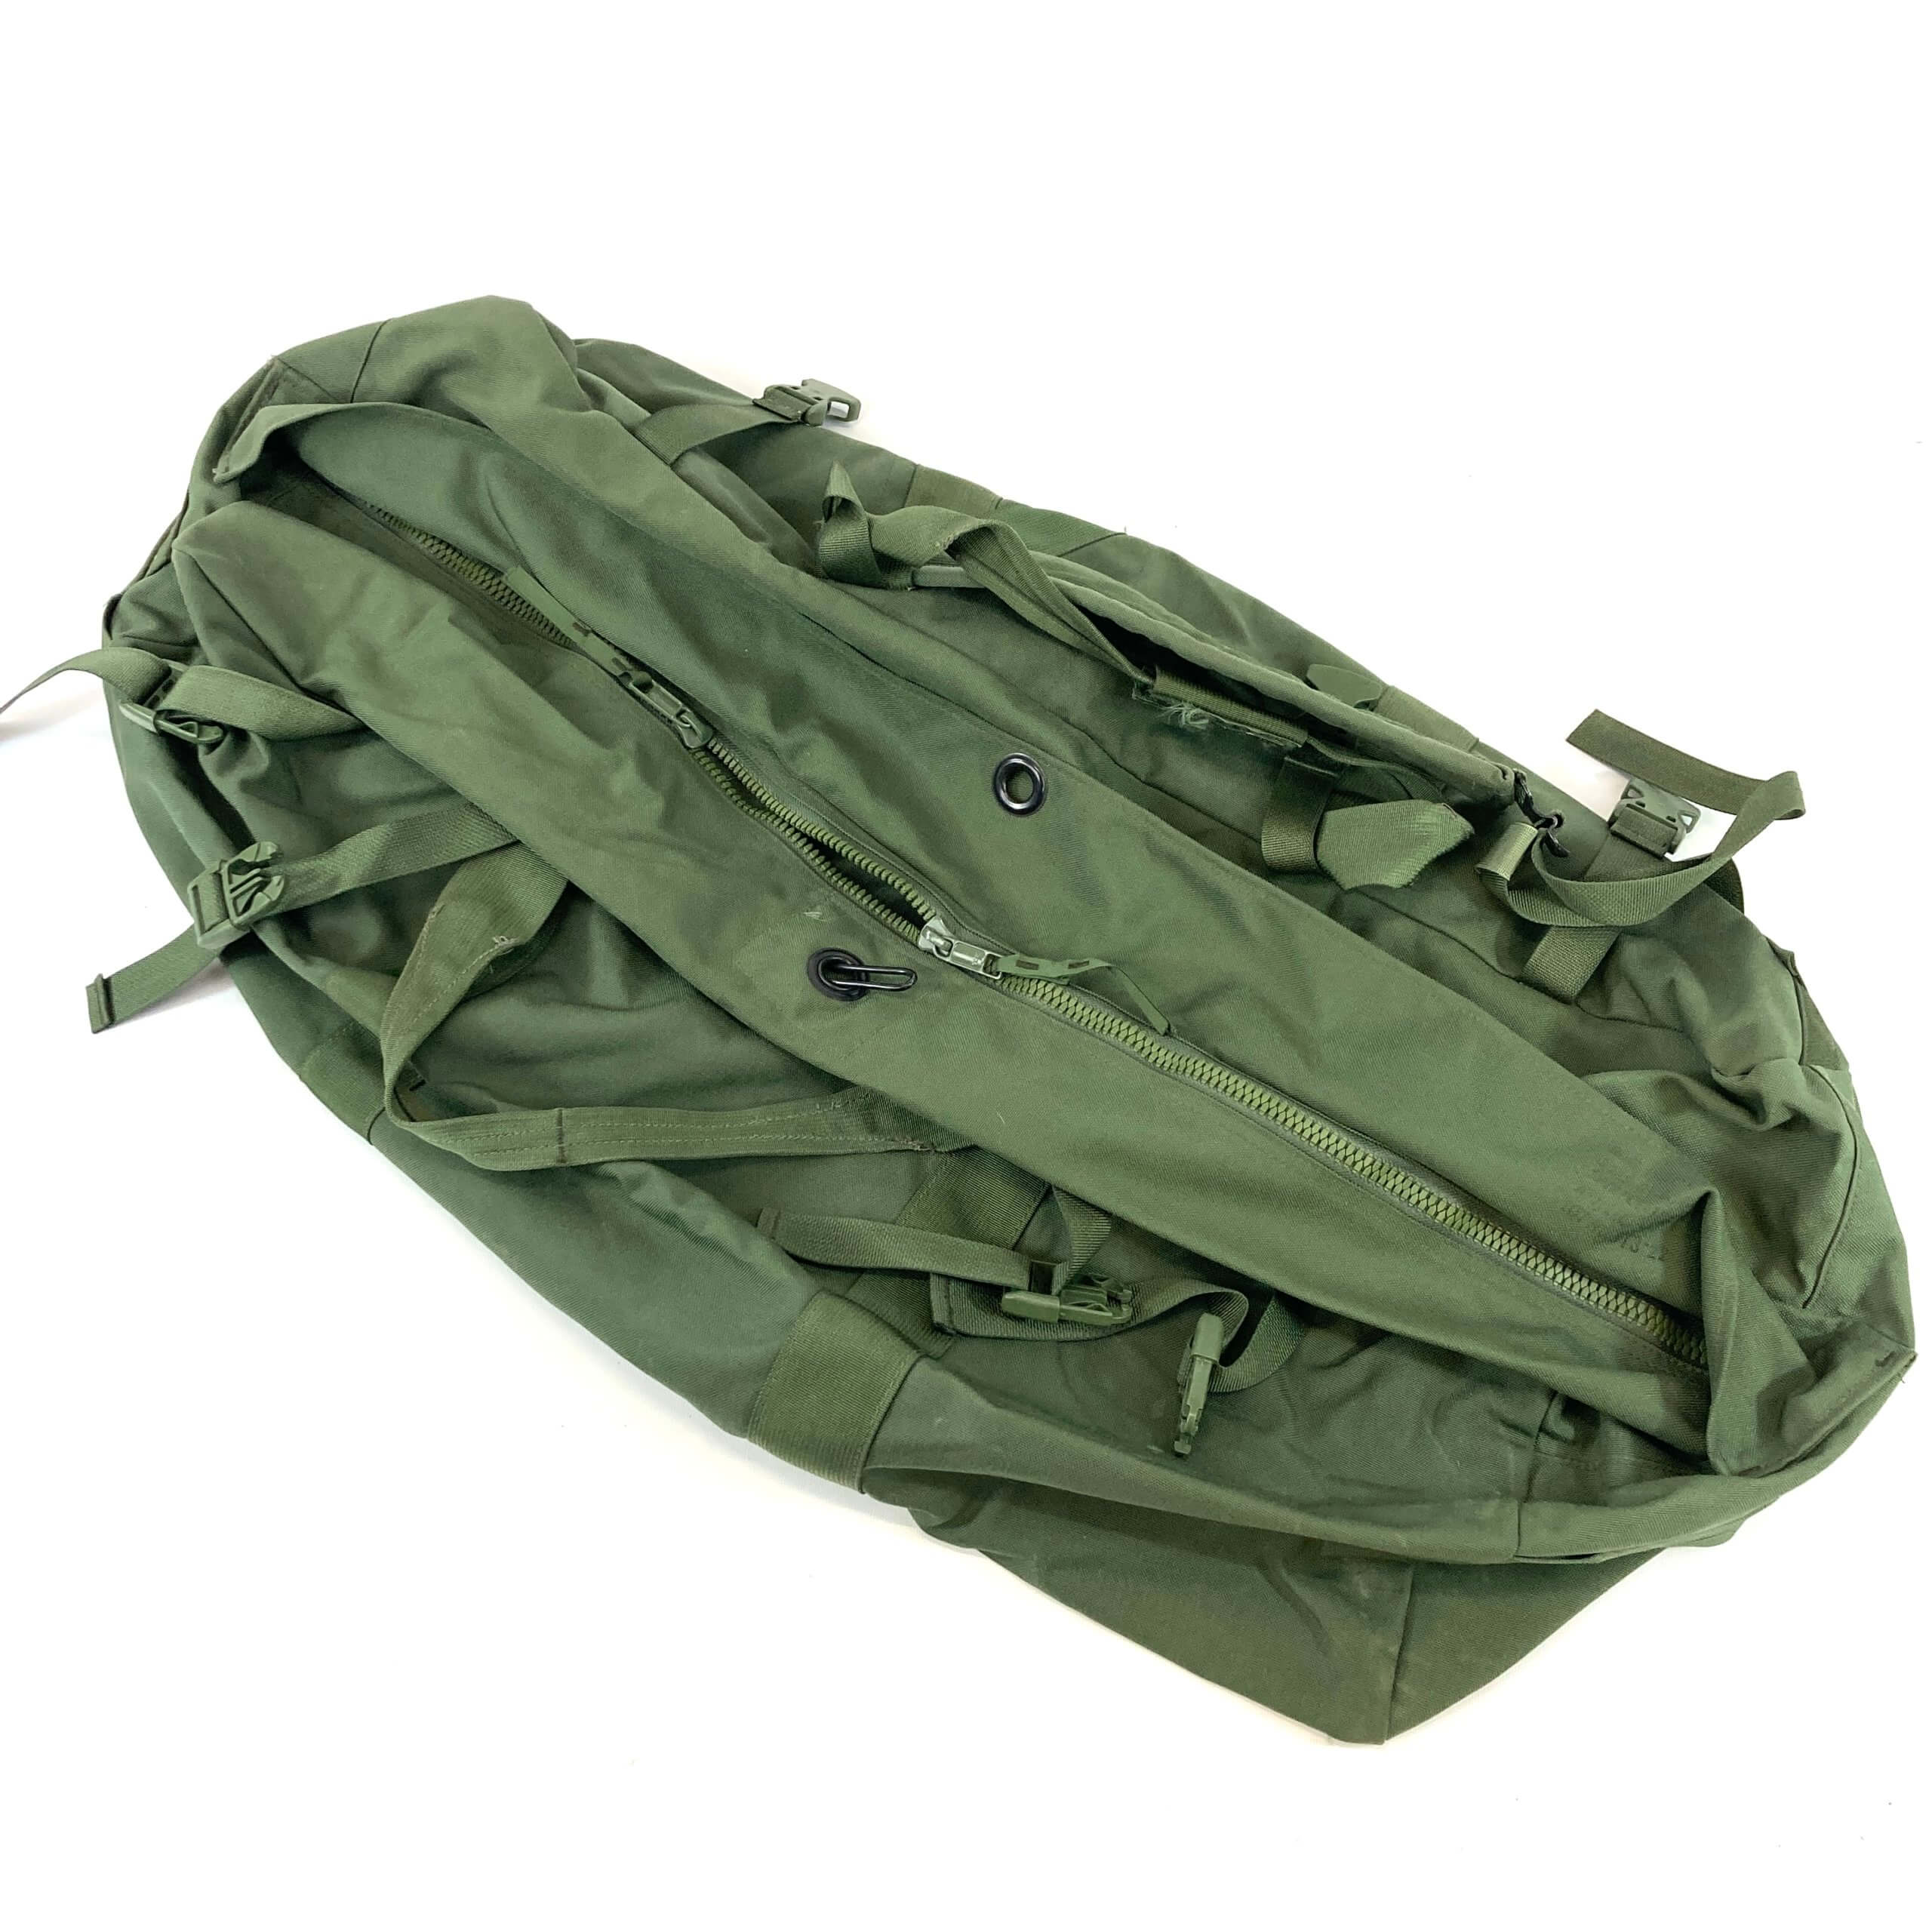 Improved Military Duffel Bag, Used [Genuine Issue Army Surplus]